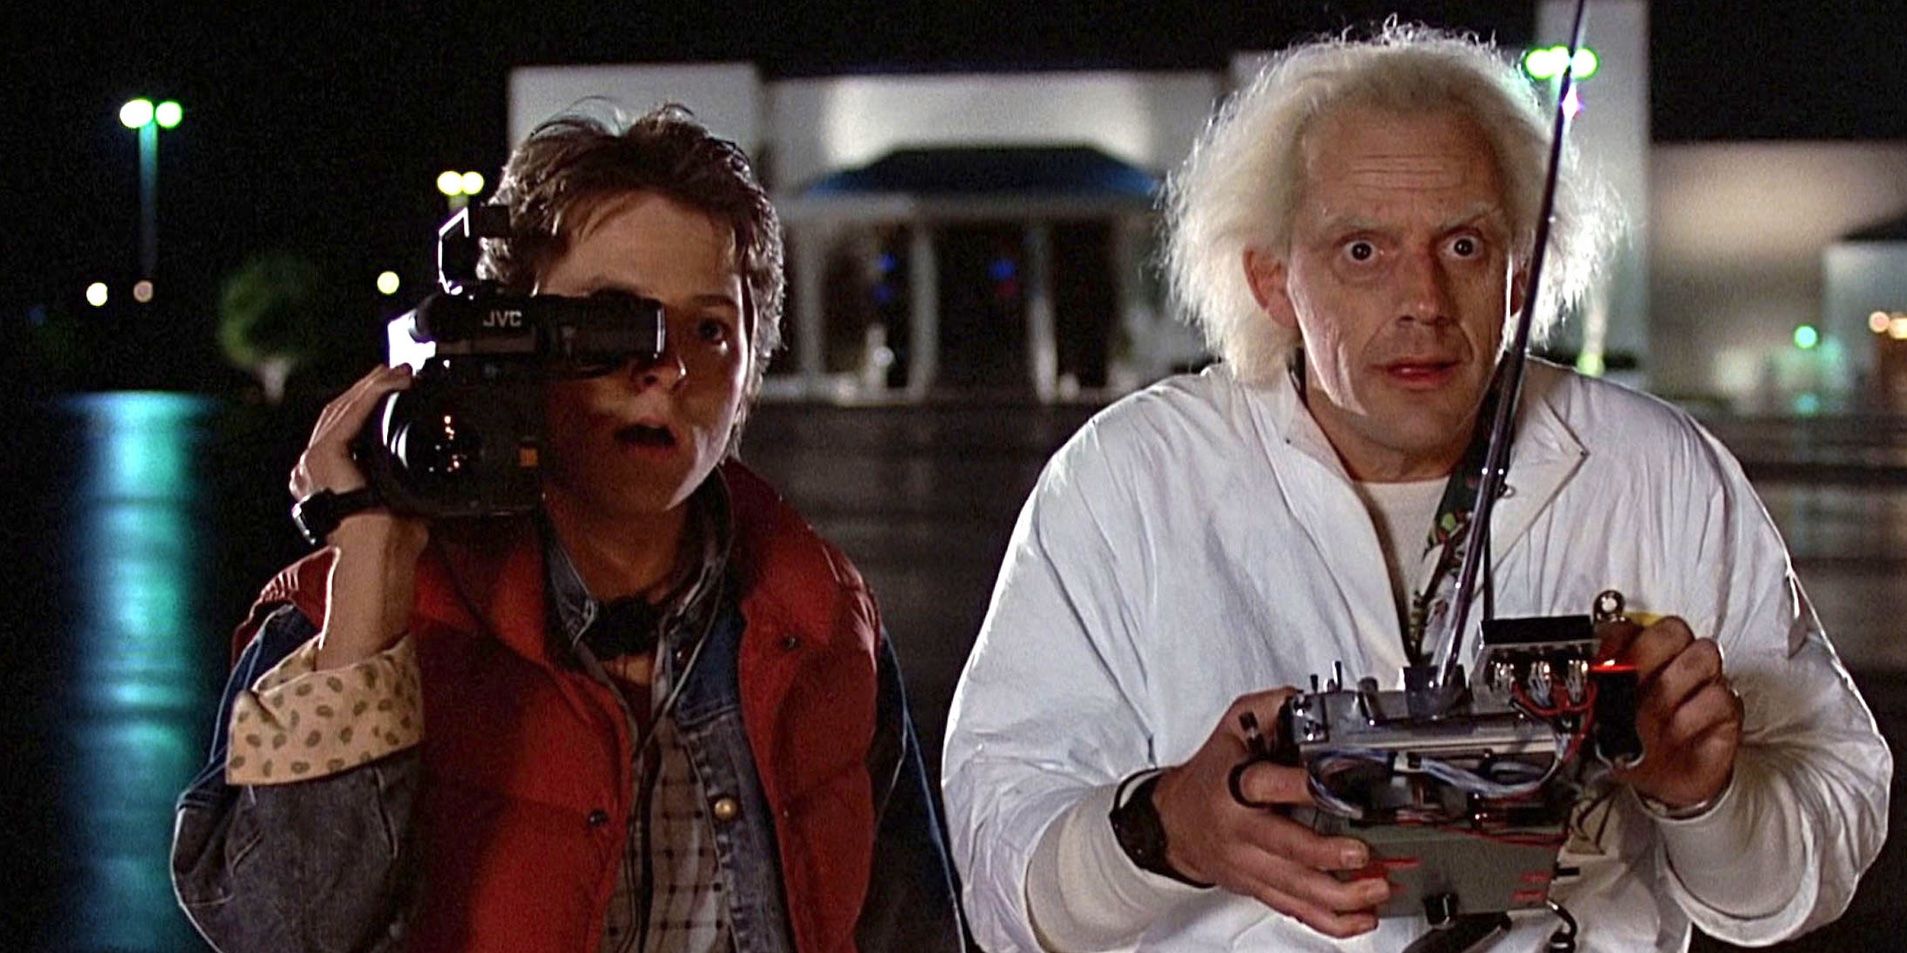 Michael J. Fox and Christopher Lloyd in 'Back to the Future'